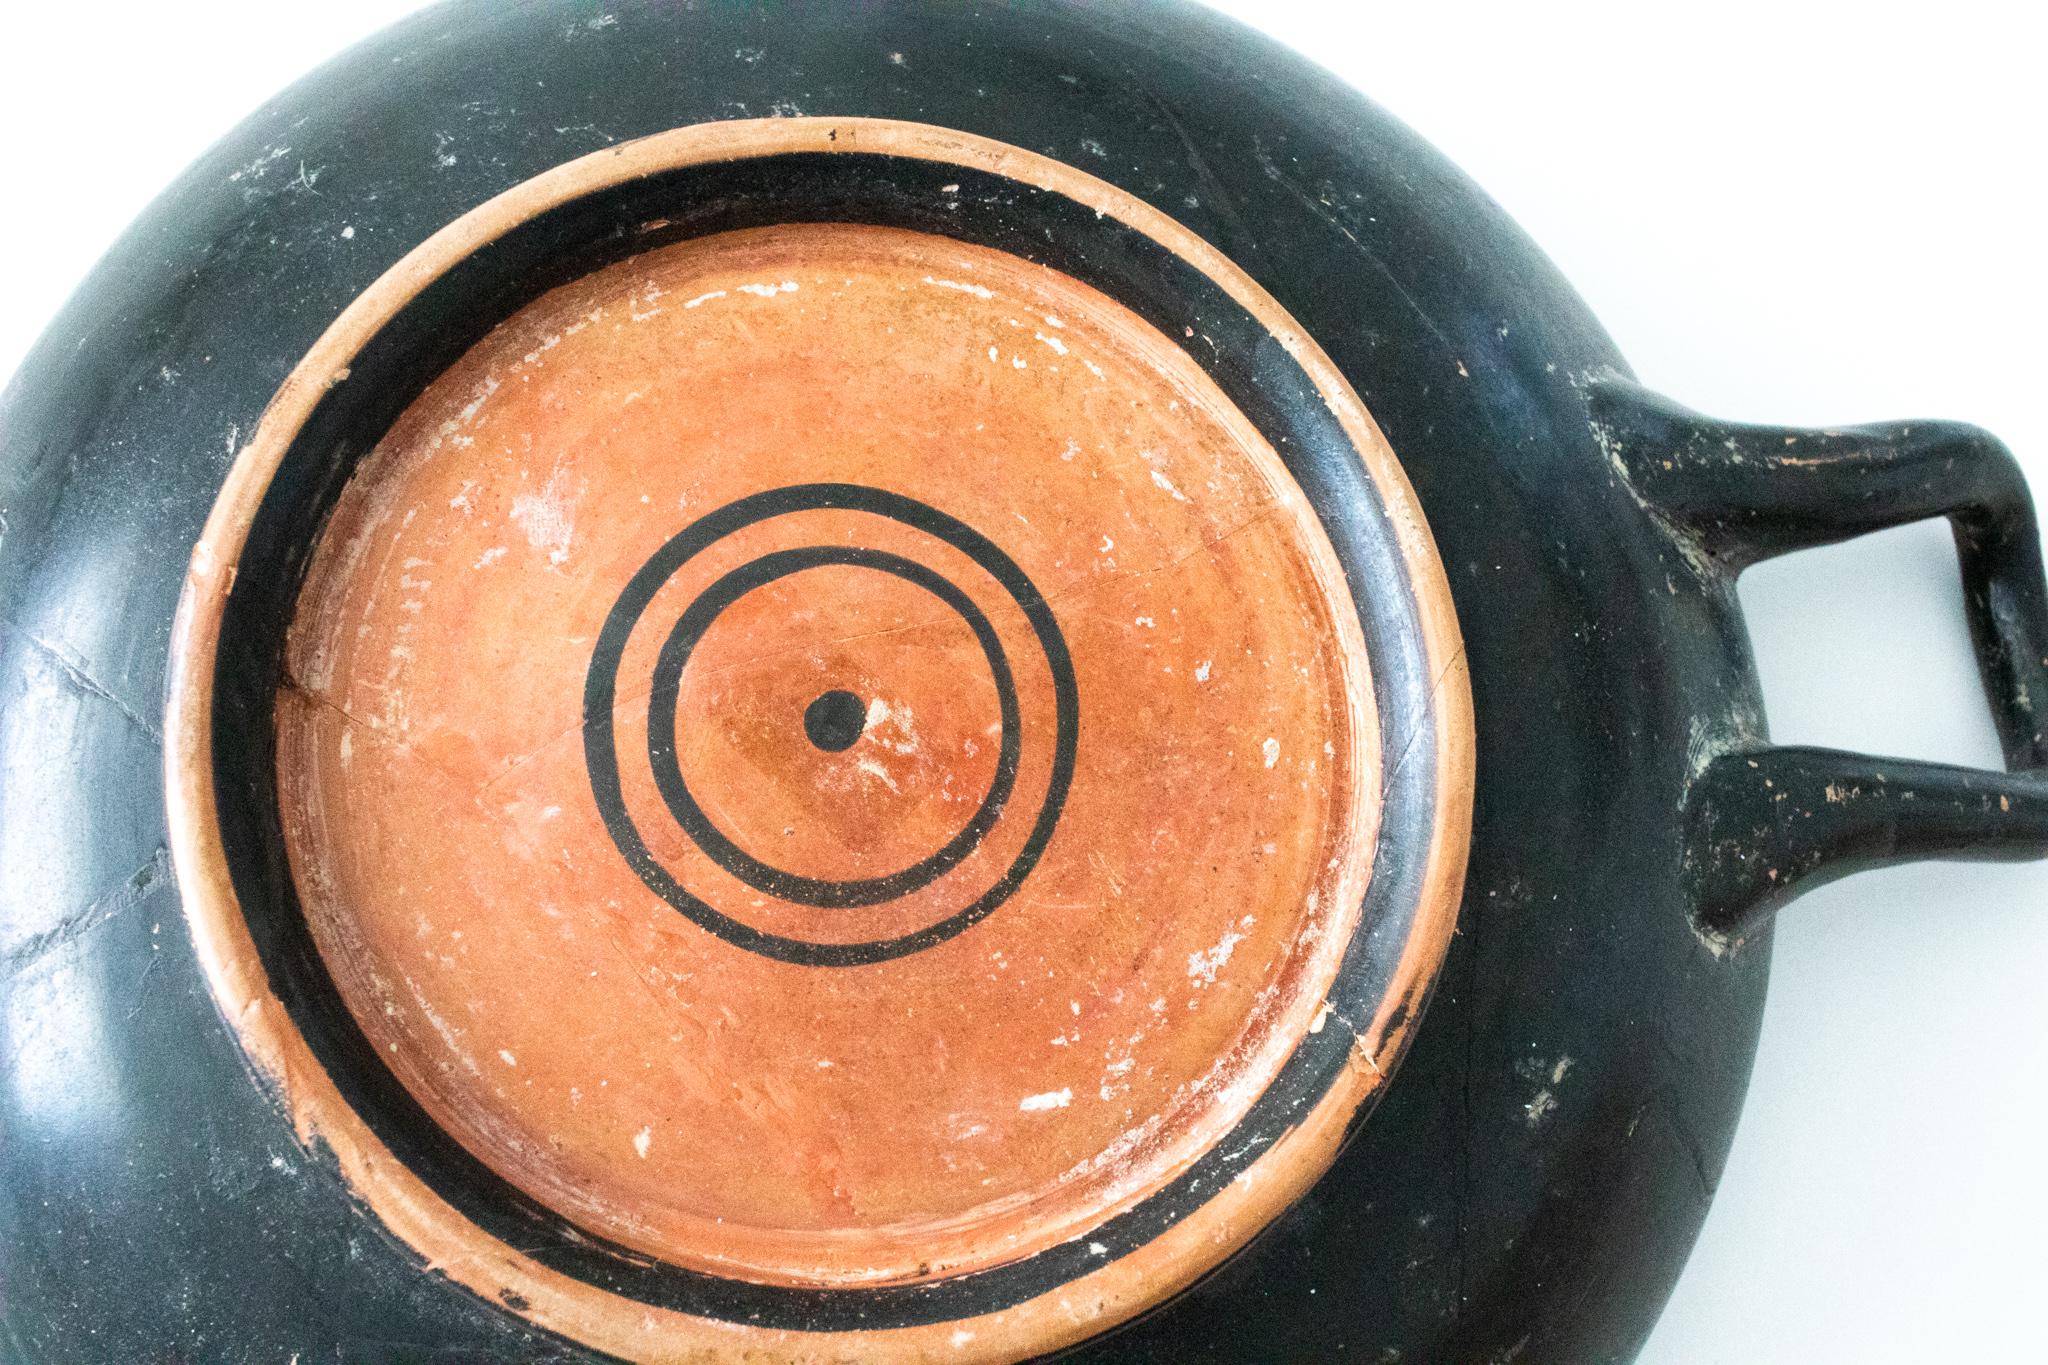 A Ancient Greek Kylix vase.

Campanian ancient Greek red terracotta stemless kylix (drinking cup) with two handles. from the Magna Grecia period. Made between the 350-300 BC in the Greek colonies of the southern italic peninsula, at Campania.